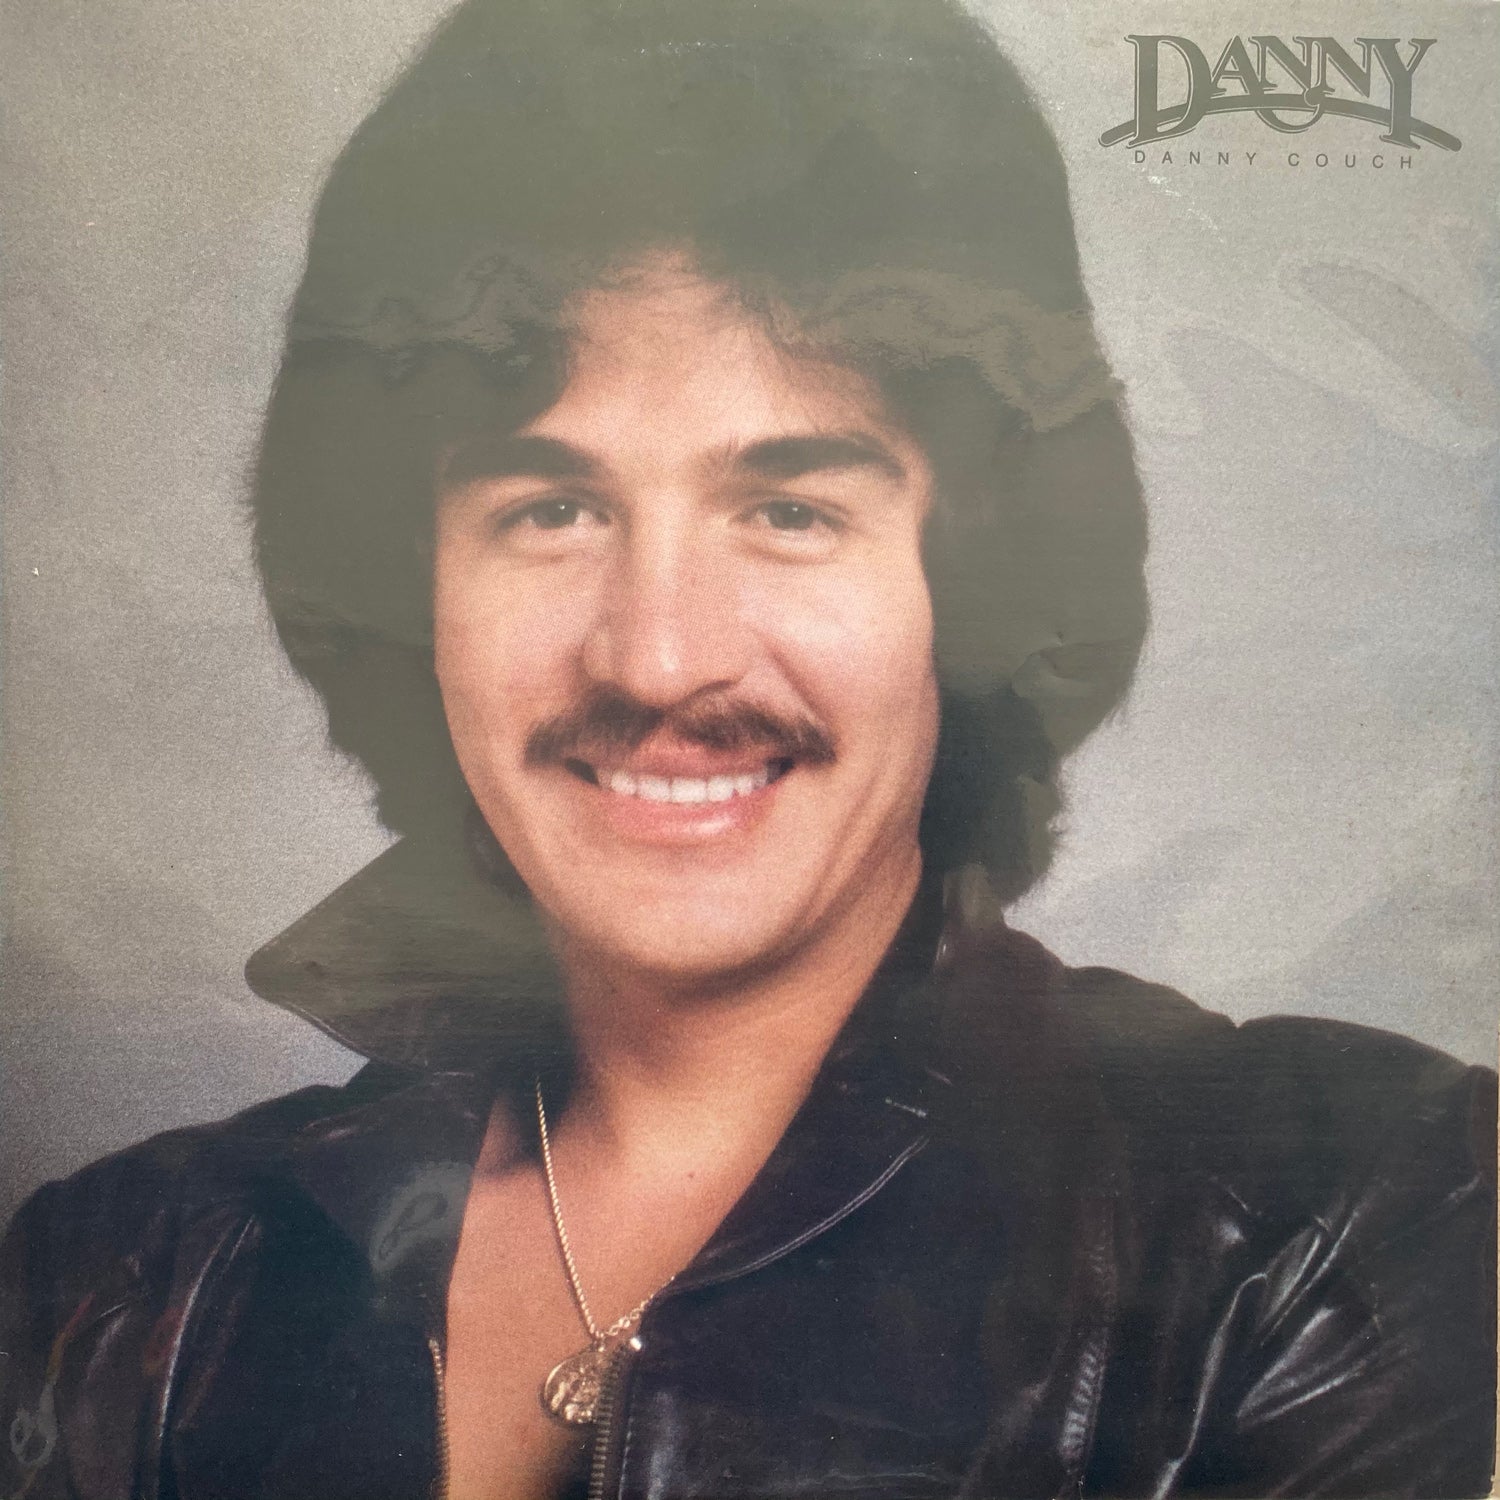 Danny Couch - Danny